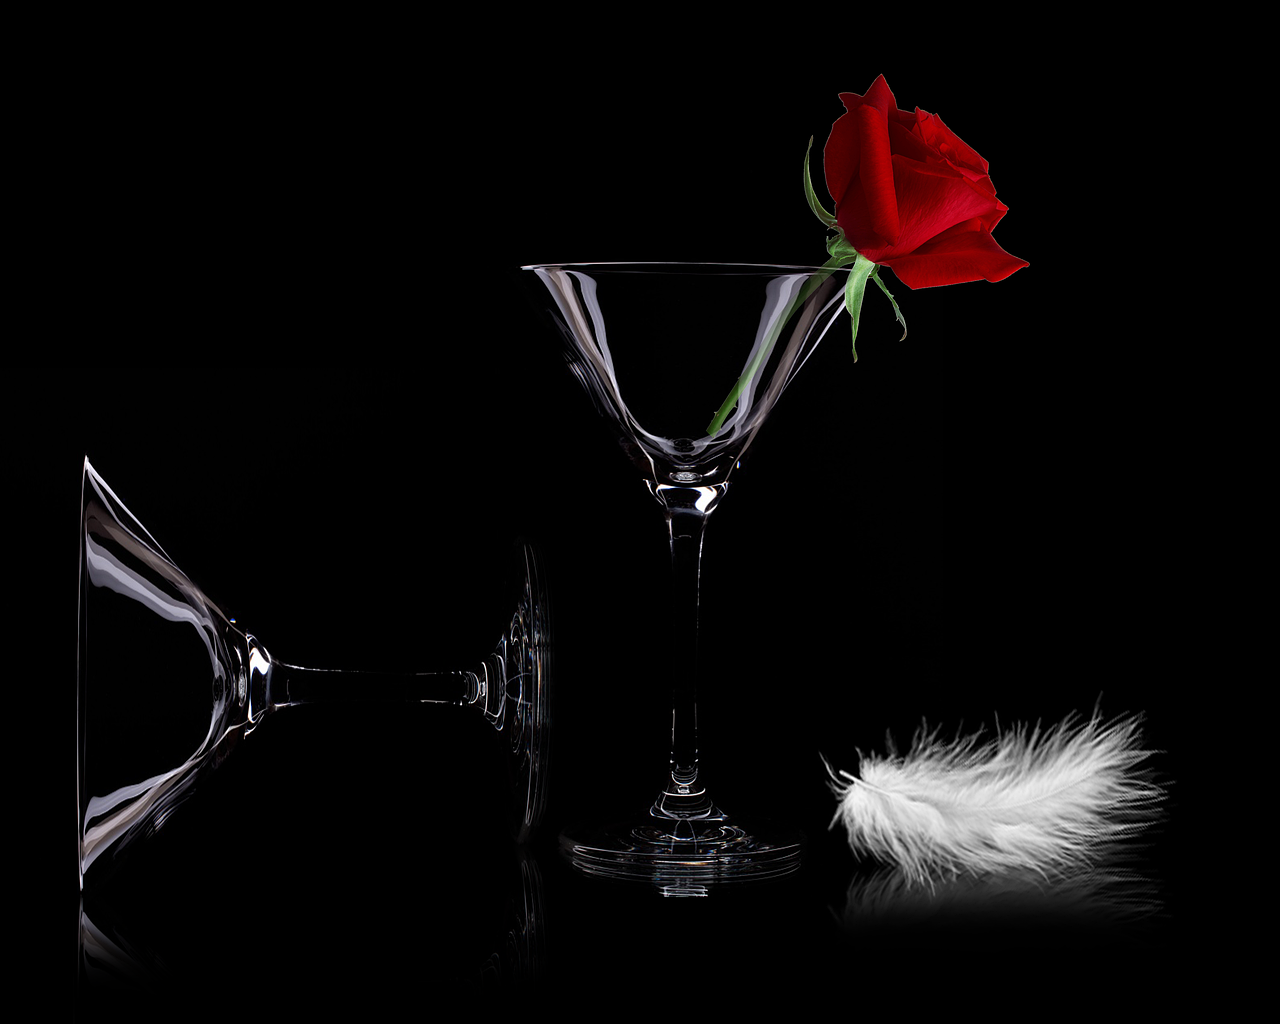 Red rose in a martini glass next to a single white feather on a black background to represent Culture & Society Events-Based Travel Ideas